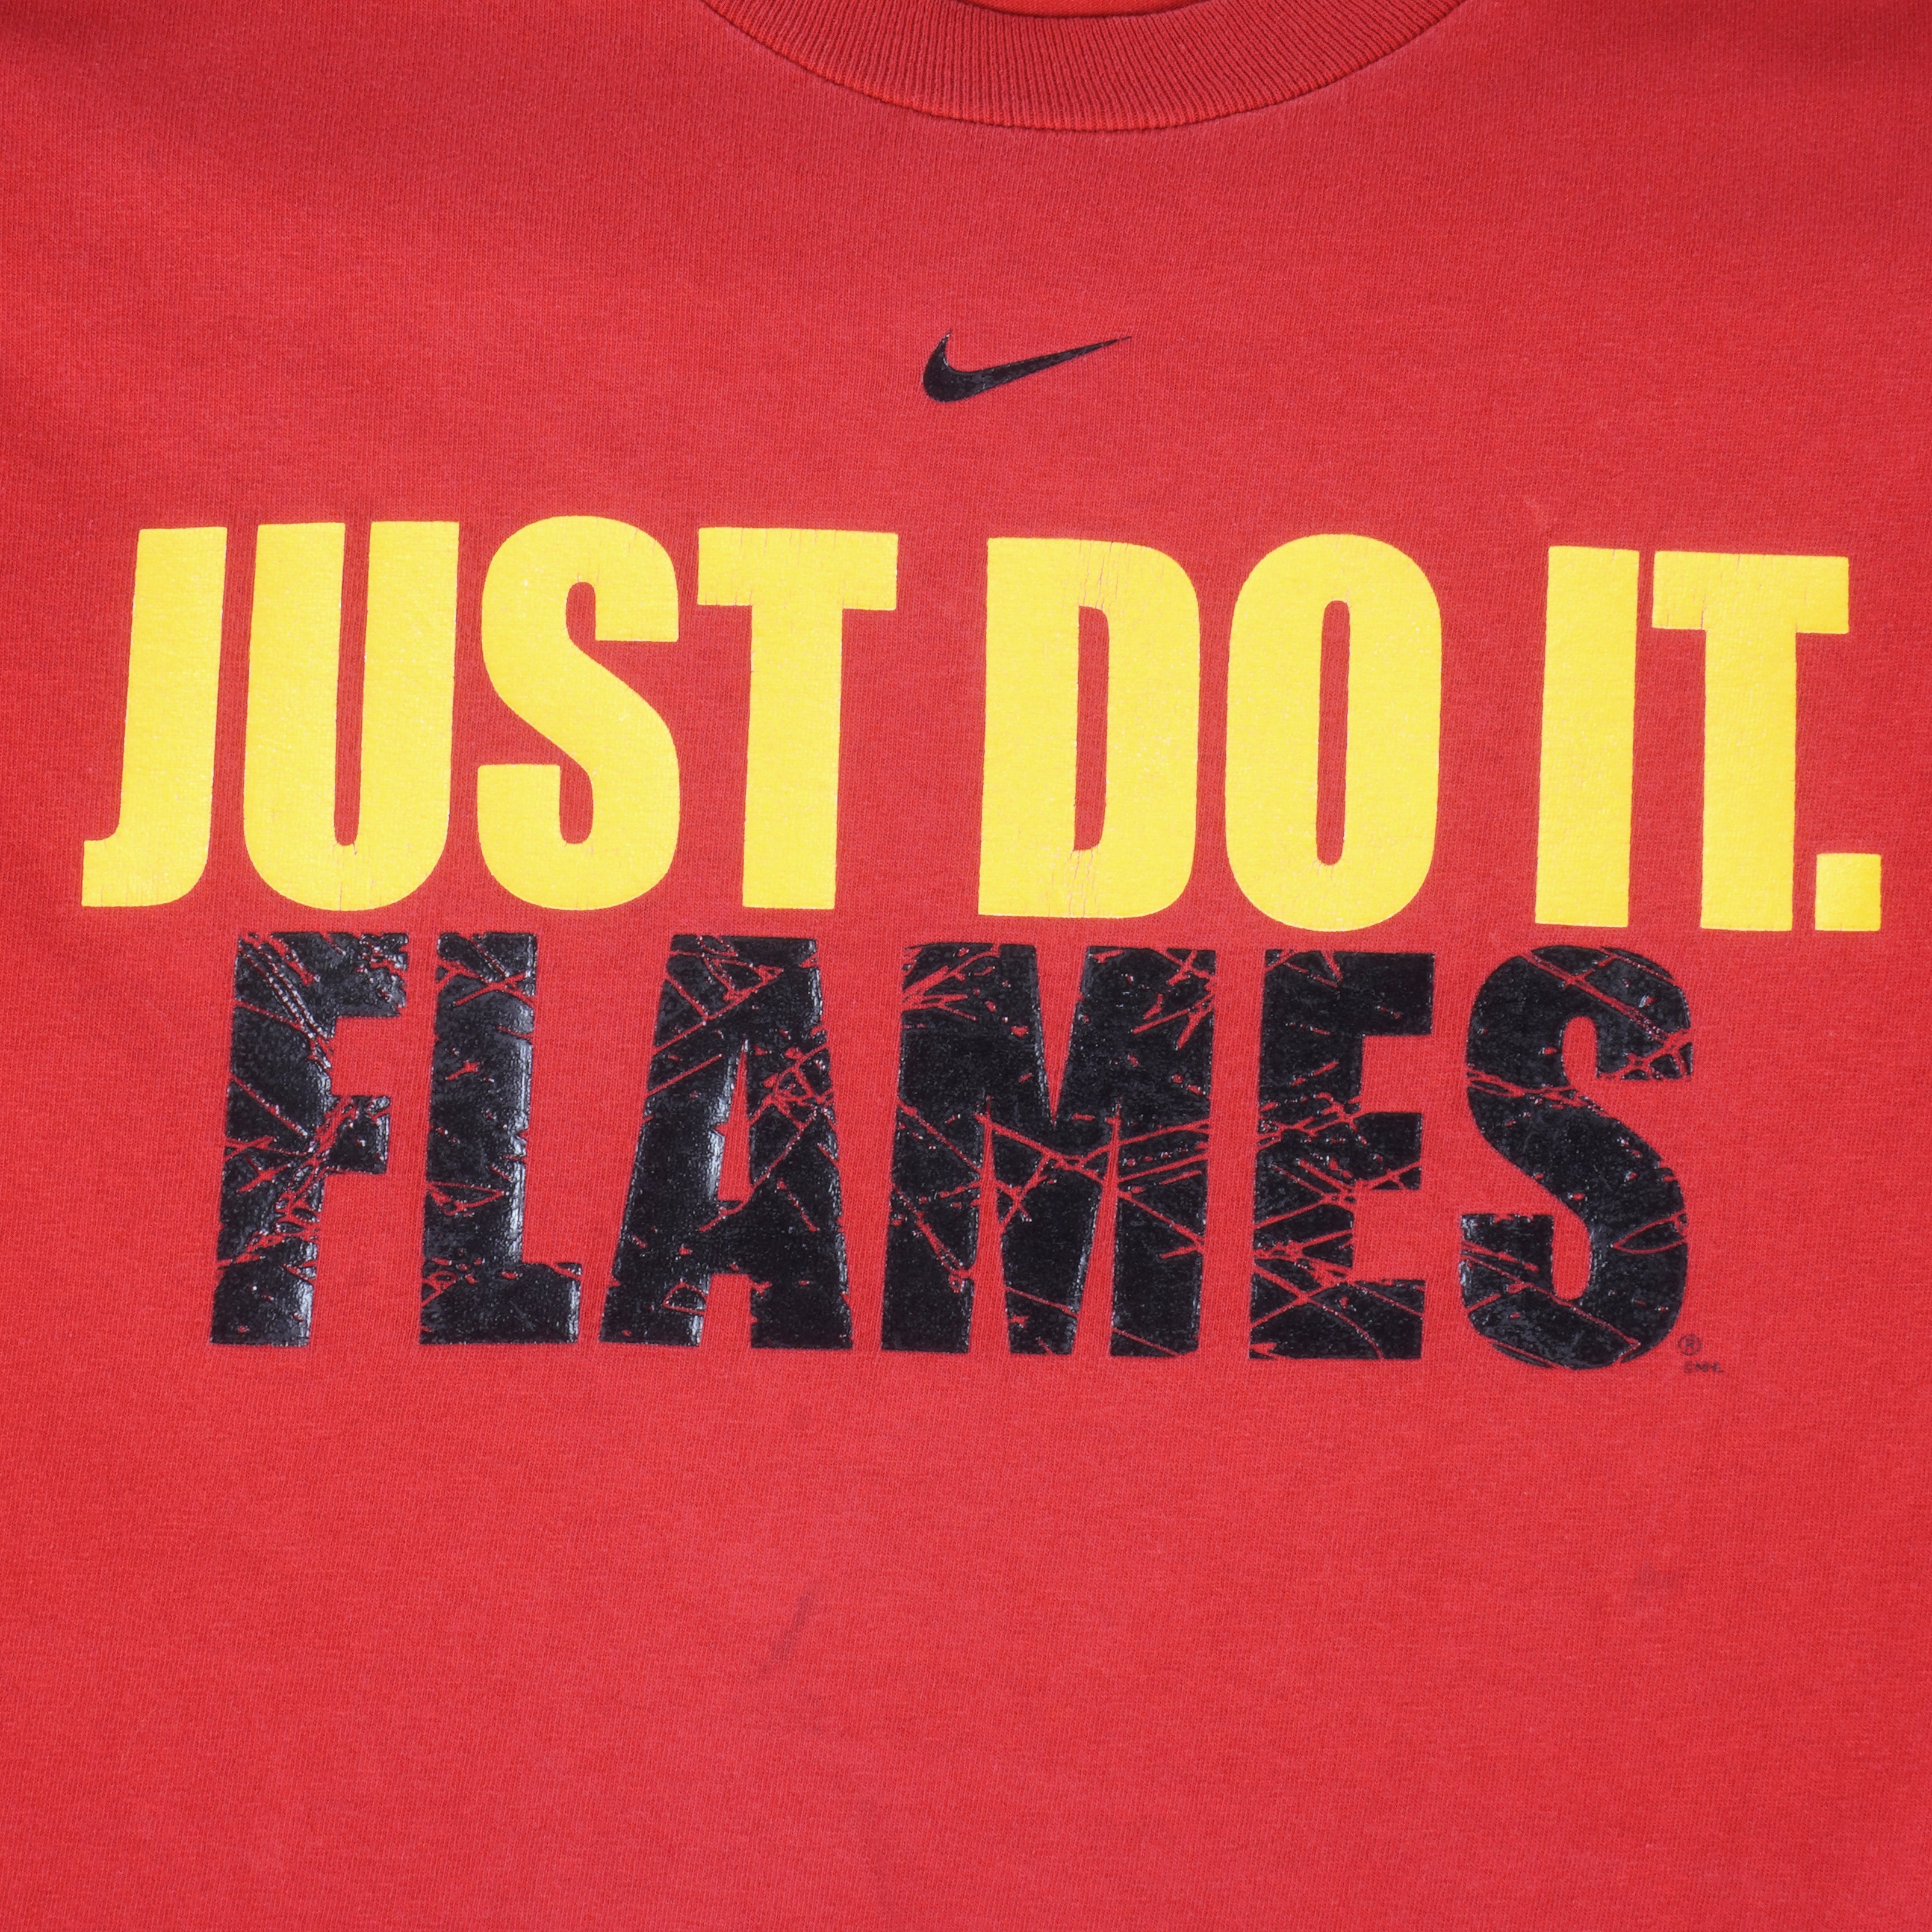 Vintage 90s red Flames Shirt